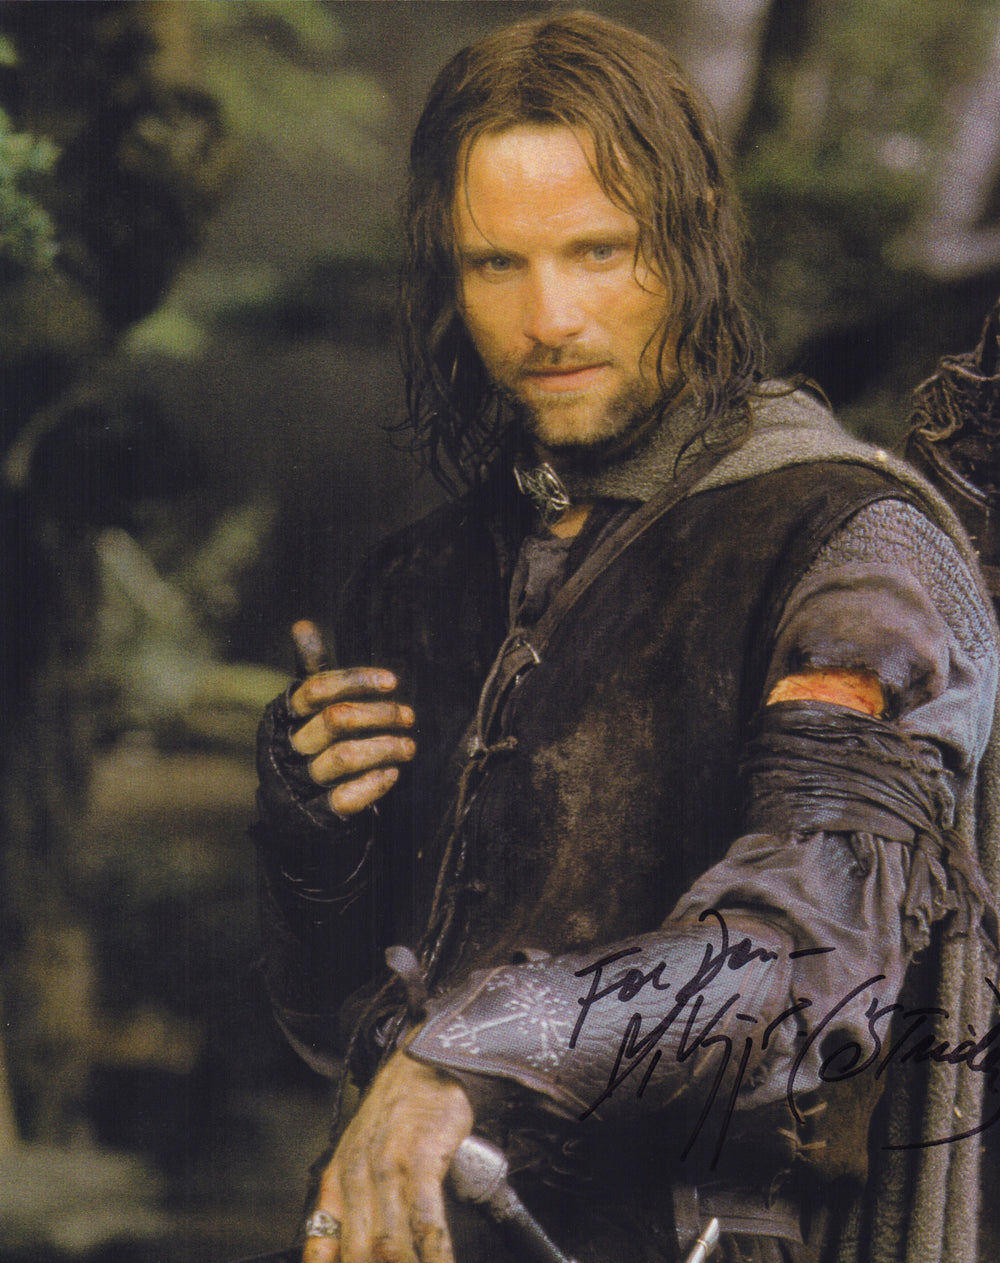 Viggo Mortensen as Strider / Aragorn in The Lord of the Rings: The Fellowship of the Ring Signed 8x10 Photo with Character Name